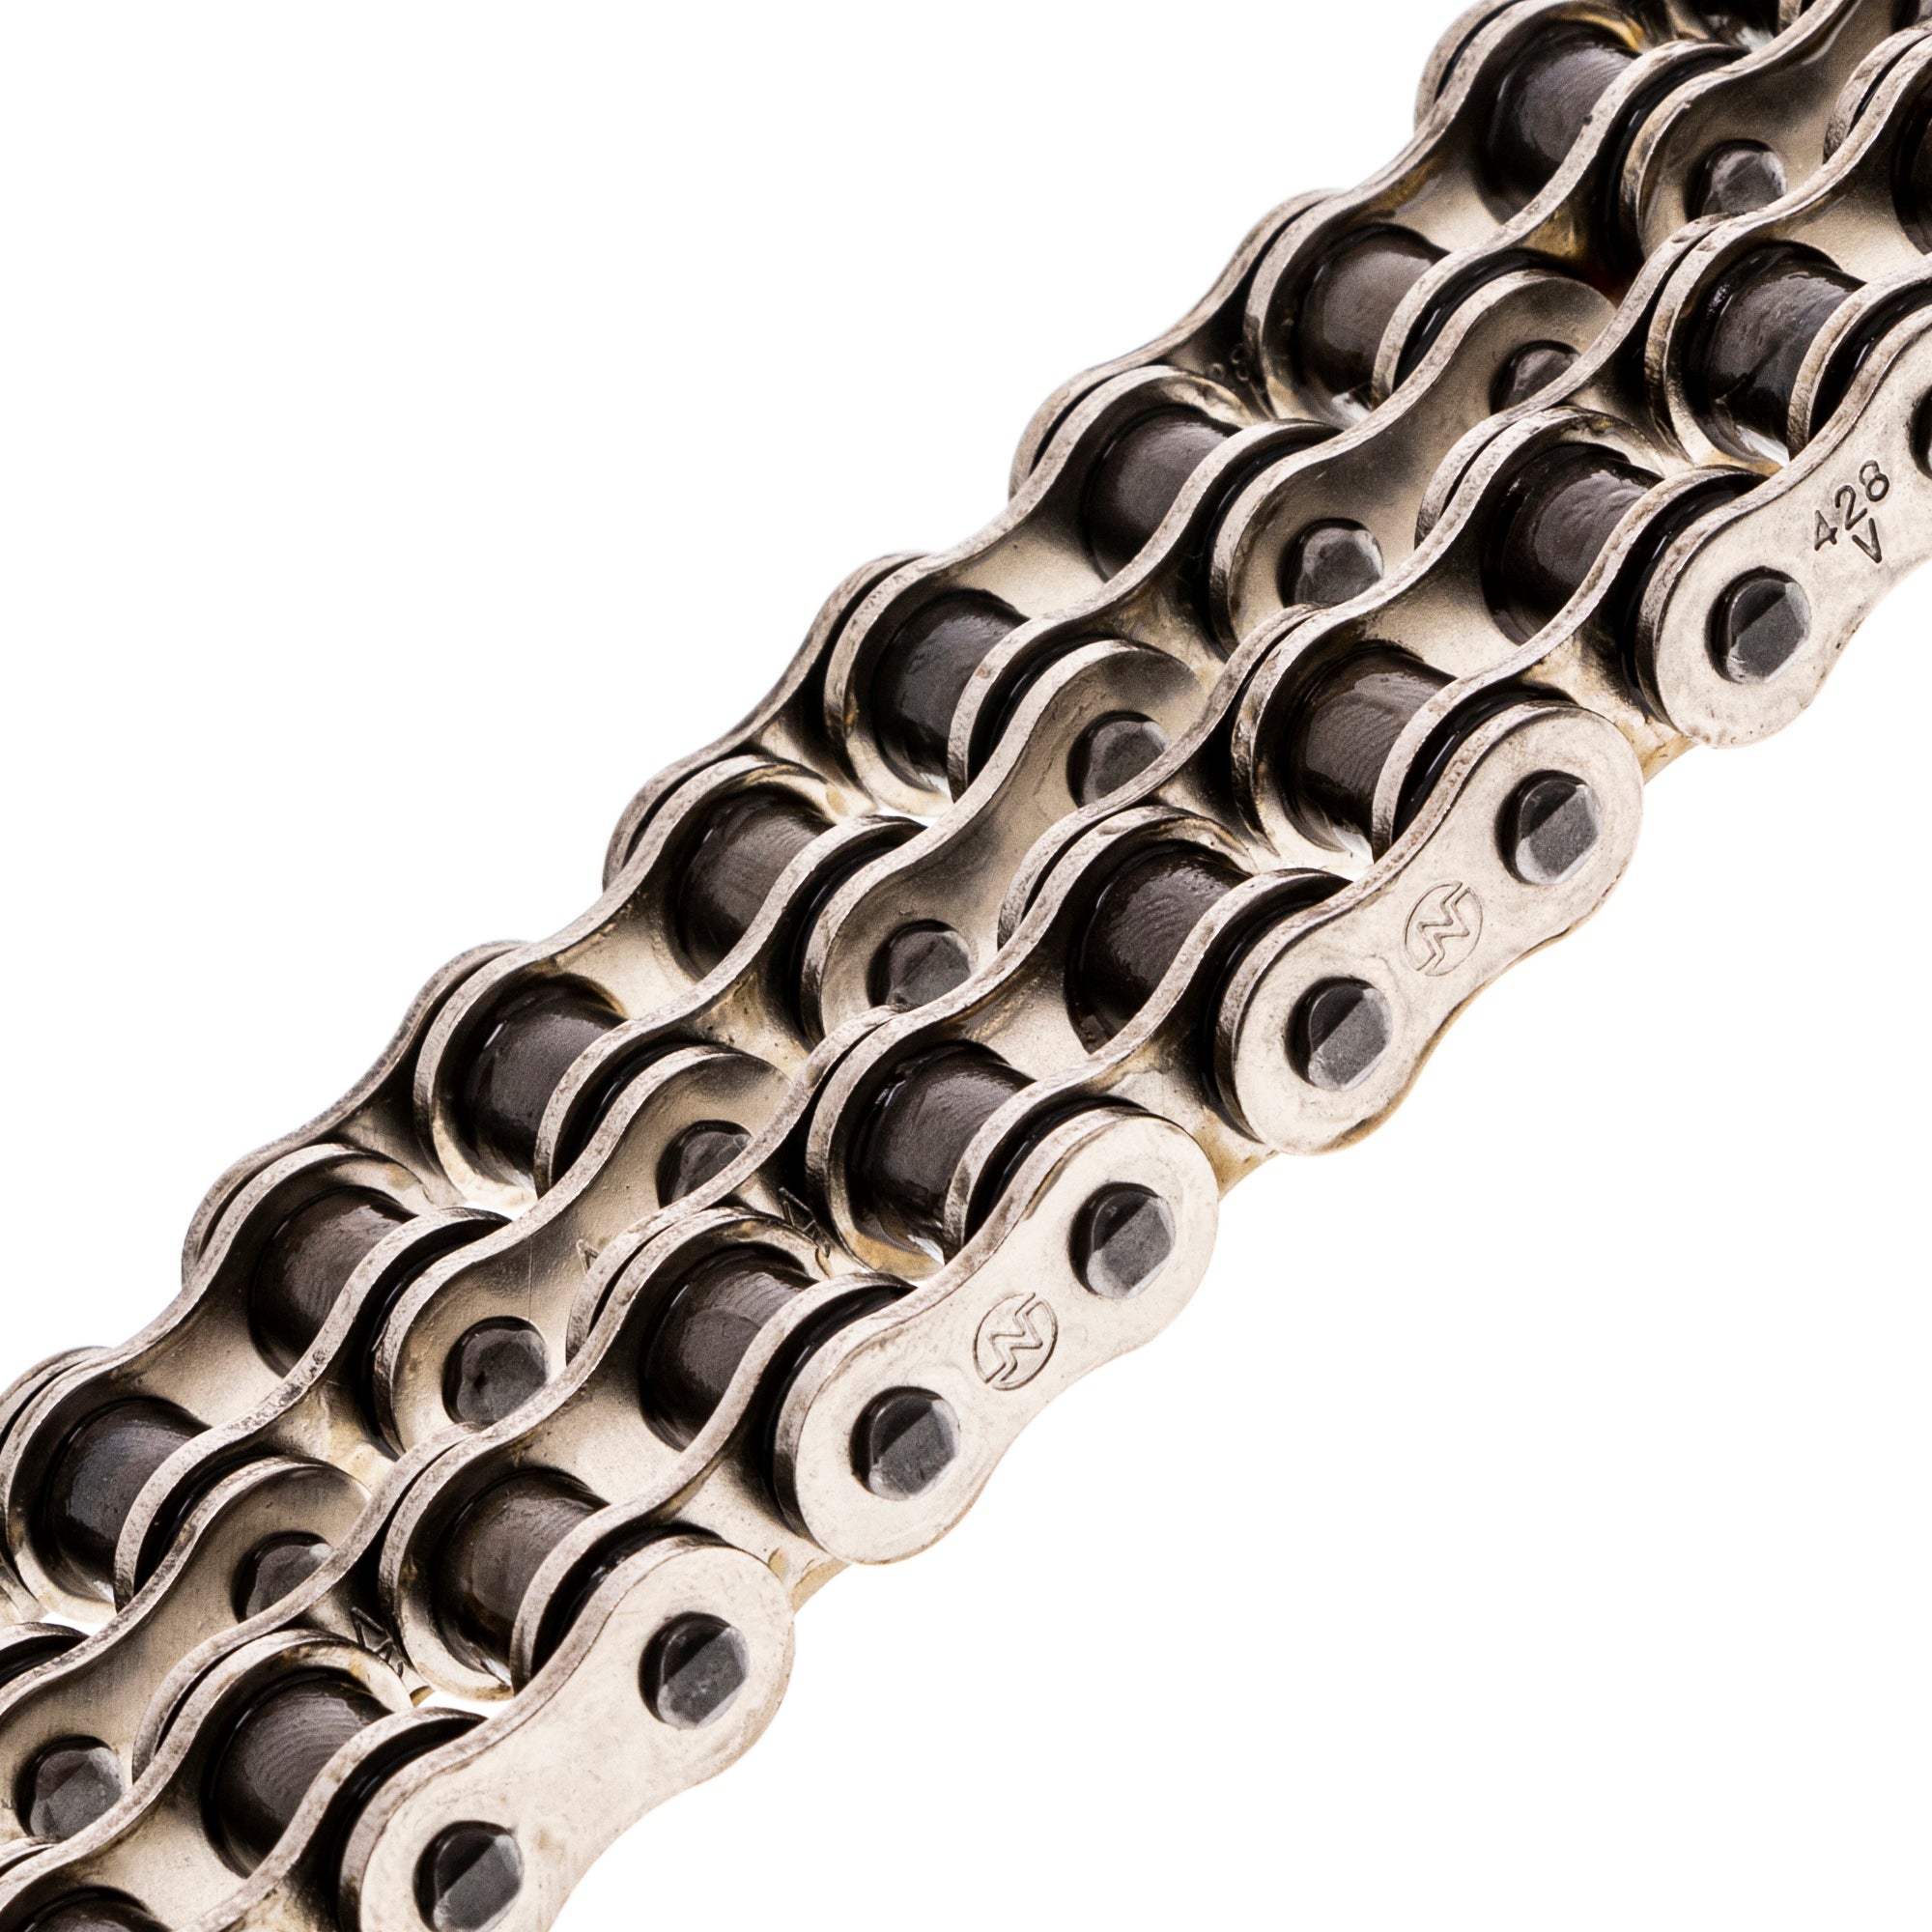 Drive Chain 92 O-Ring w/ Master Link for zOTHER FourTrax ATC125M ATC110 5328 40530-VM6-003 NICHE 519-CDC2439H